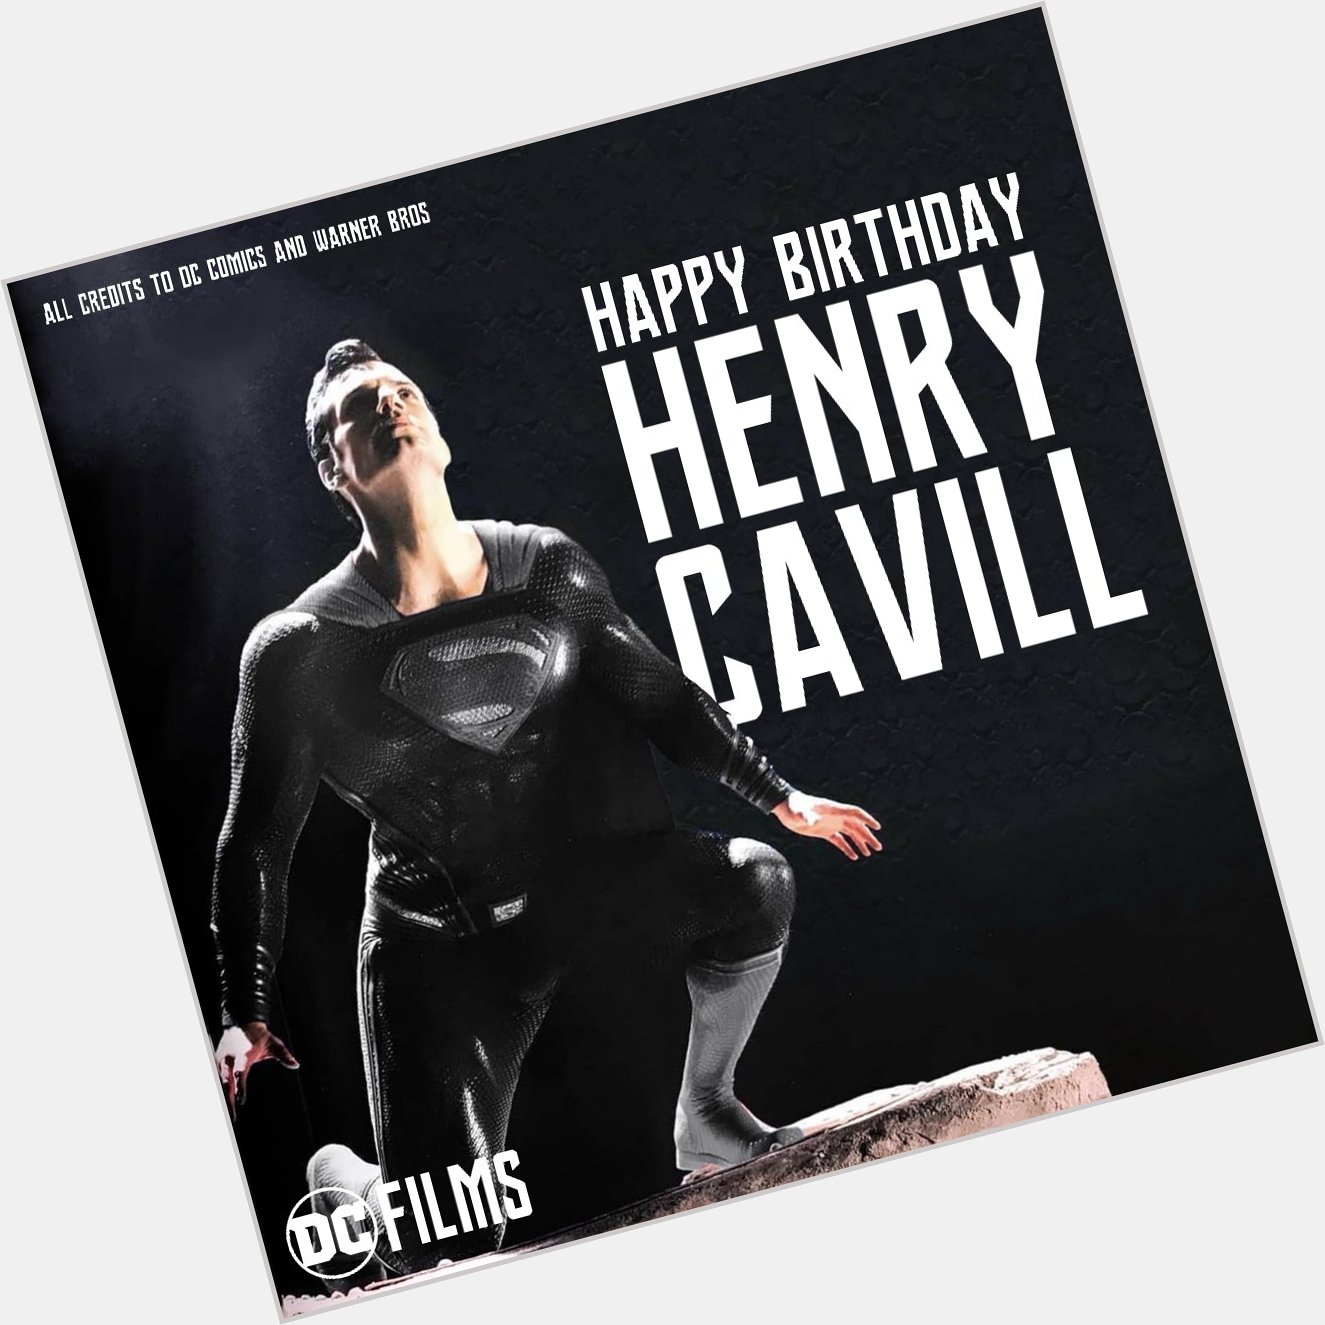 He has yet to rise.

Happy birthday to the greatest Superman ever, Henry Cavill! 